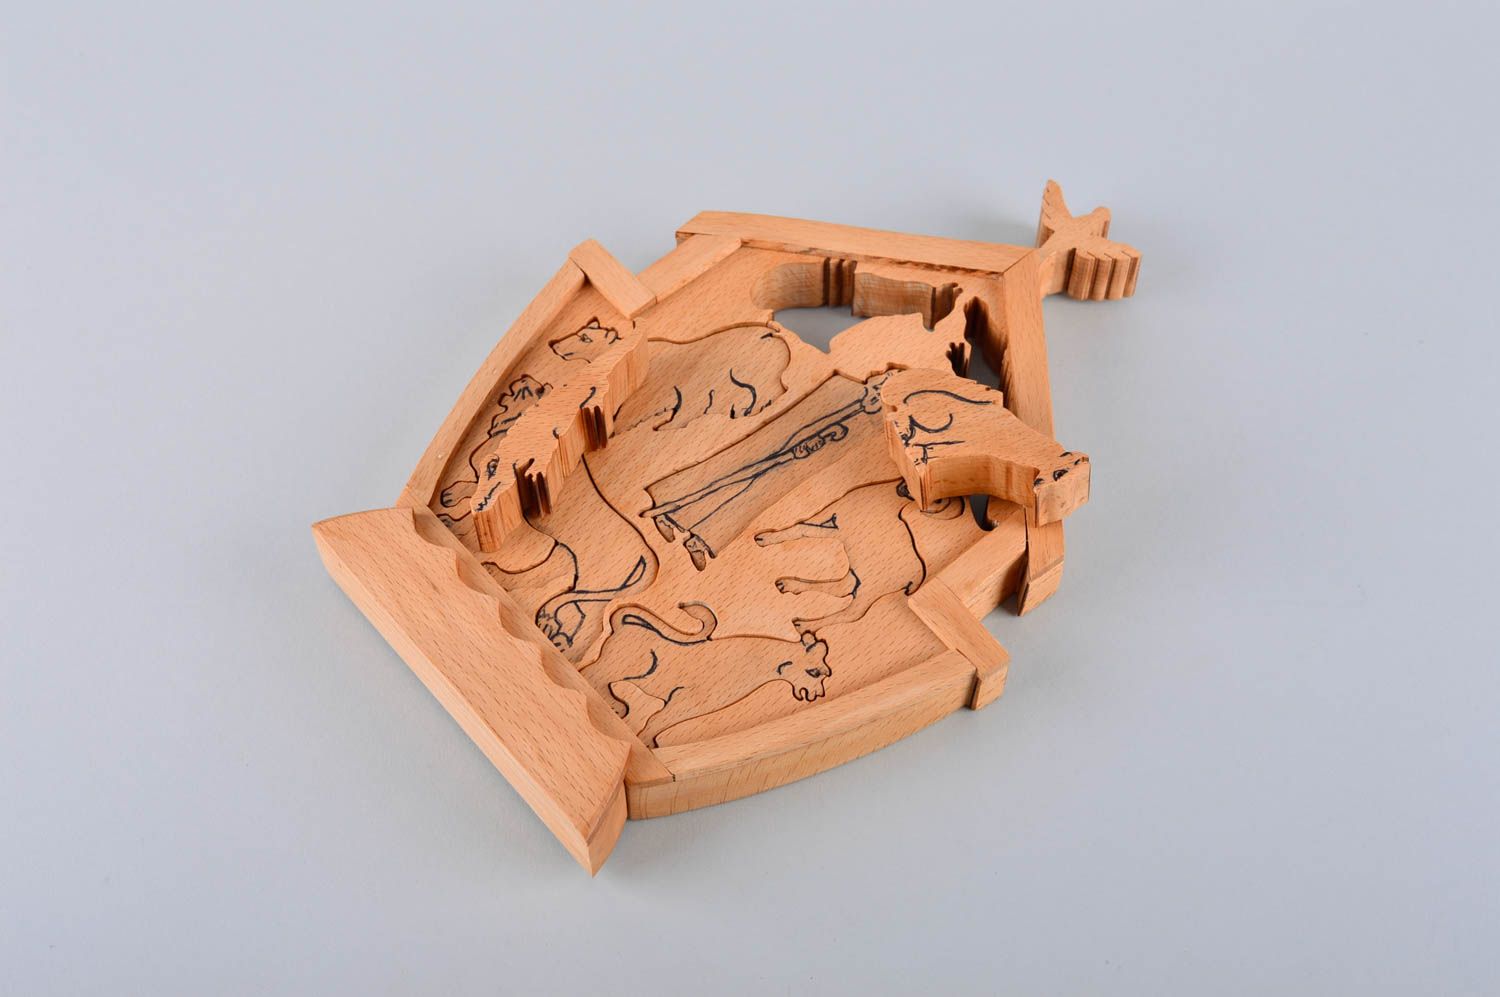 Handmade puzzle unusual toy for children designer toy wooden puzzles gift ideas photo 5